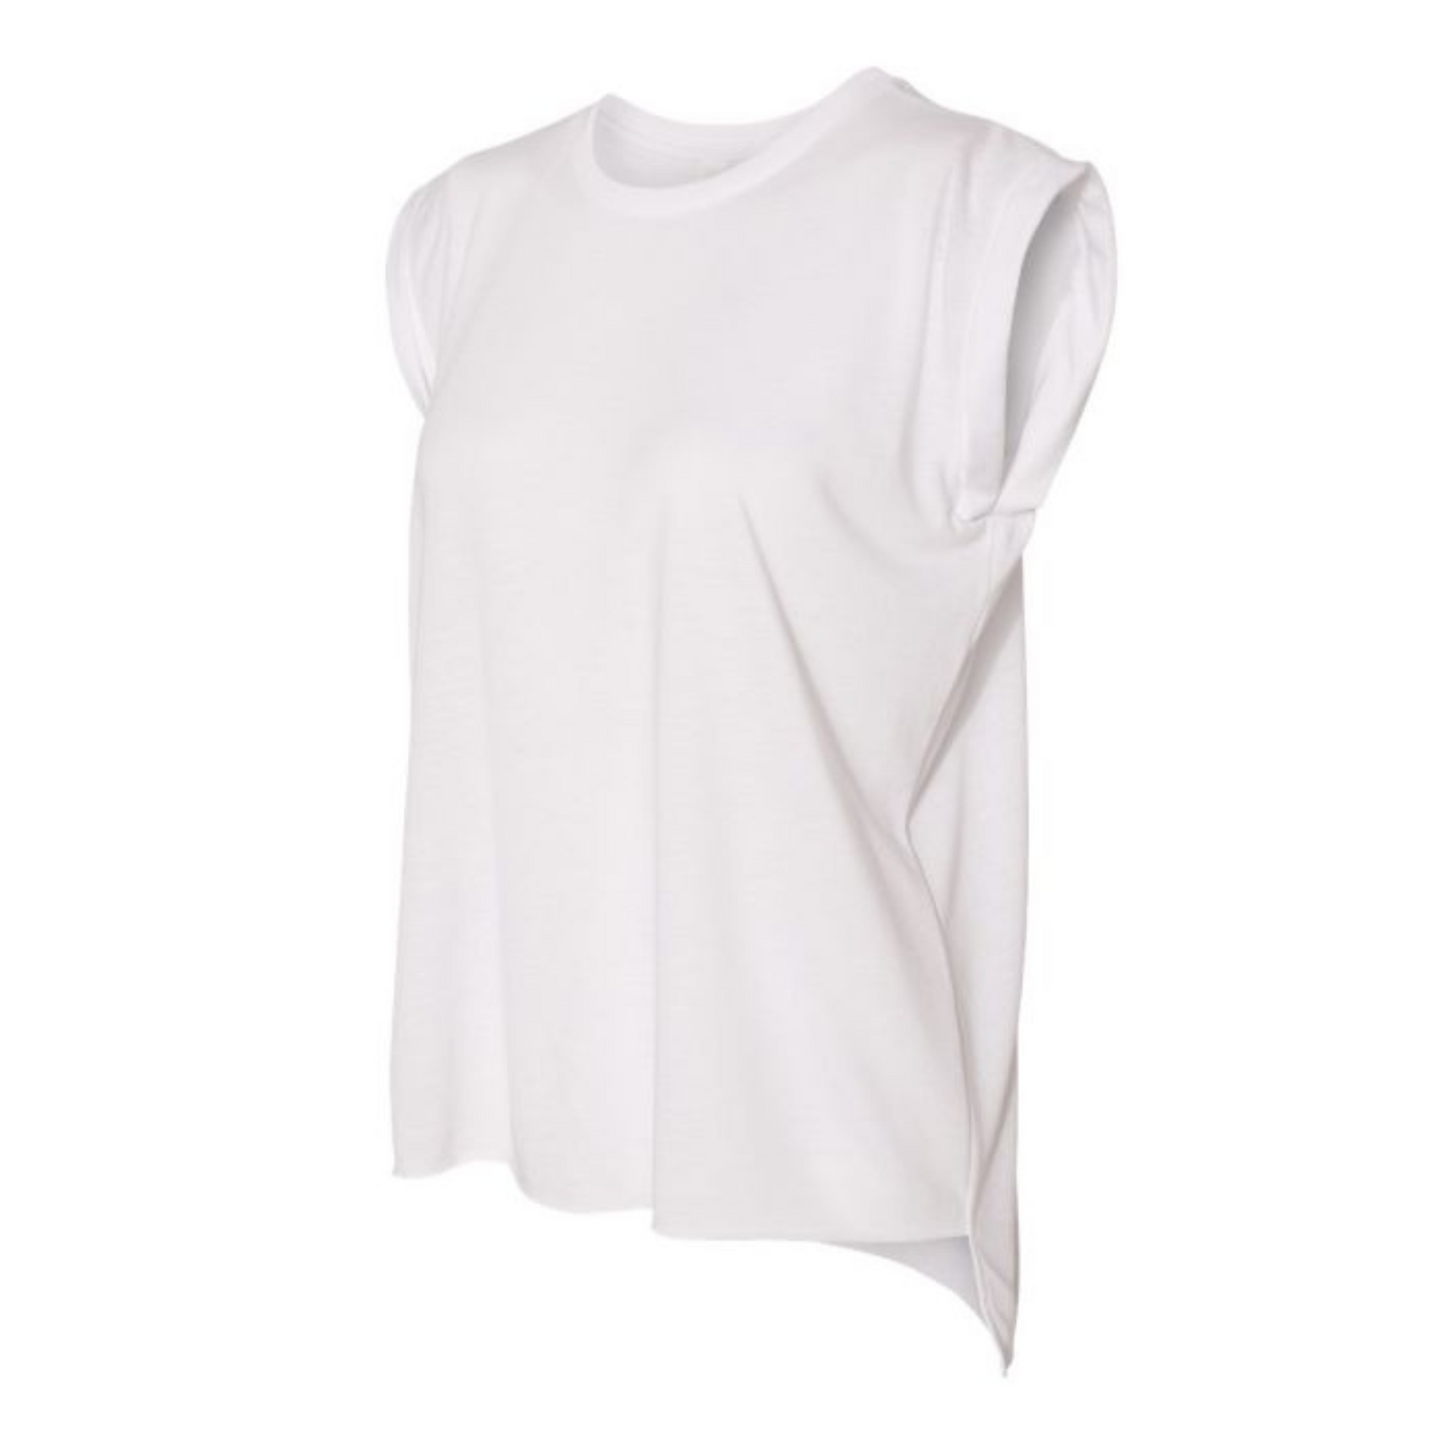 Ladies Flowy Muscle Tee with Rolled Cuff - White